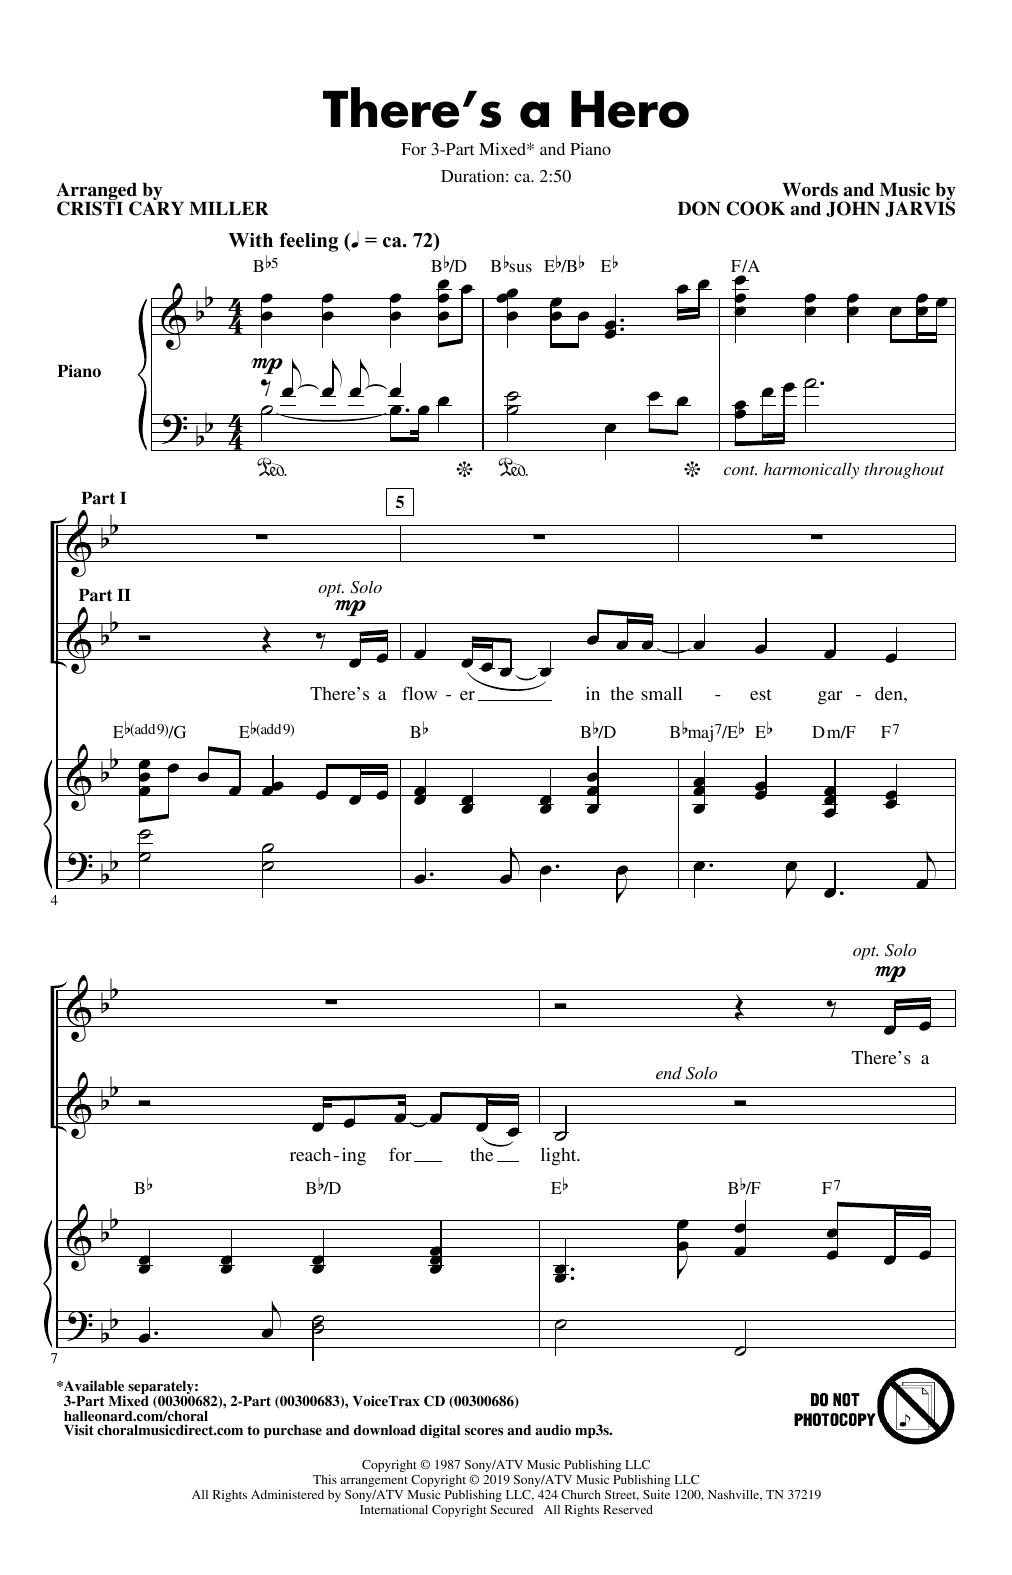 Download Don Cook and John Jarvis There's A Hero (arr. Cristi Cary Miller Sheet Music